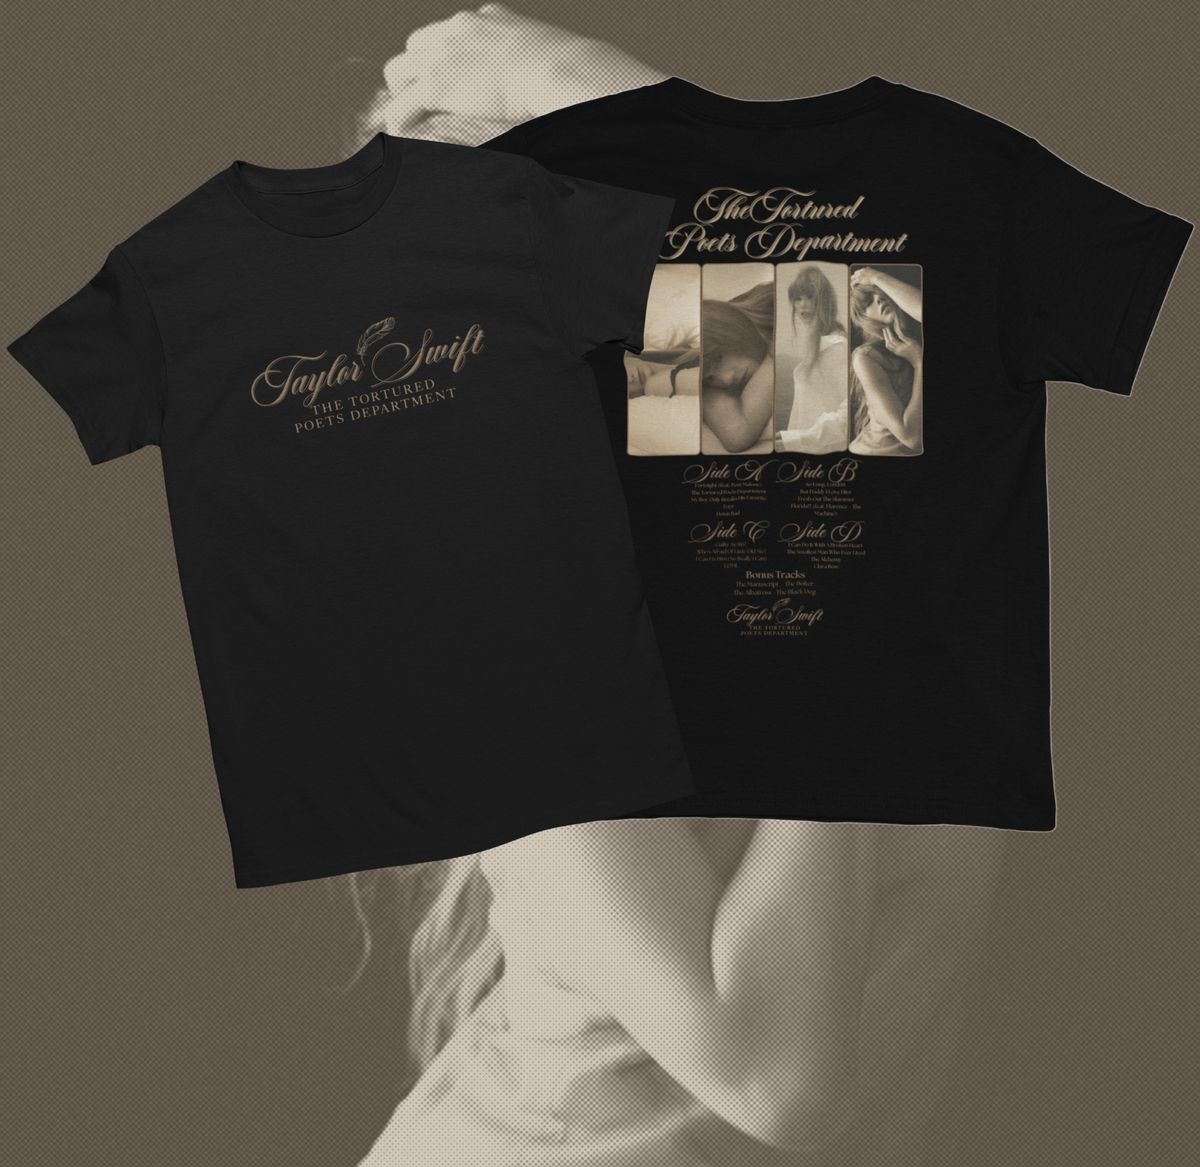 Nome do produto: CAMISETA TAYLOR SWIFT THE TORTURED POETS DEPARTMENT